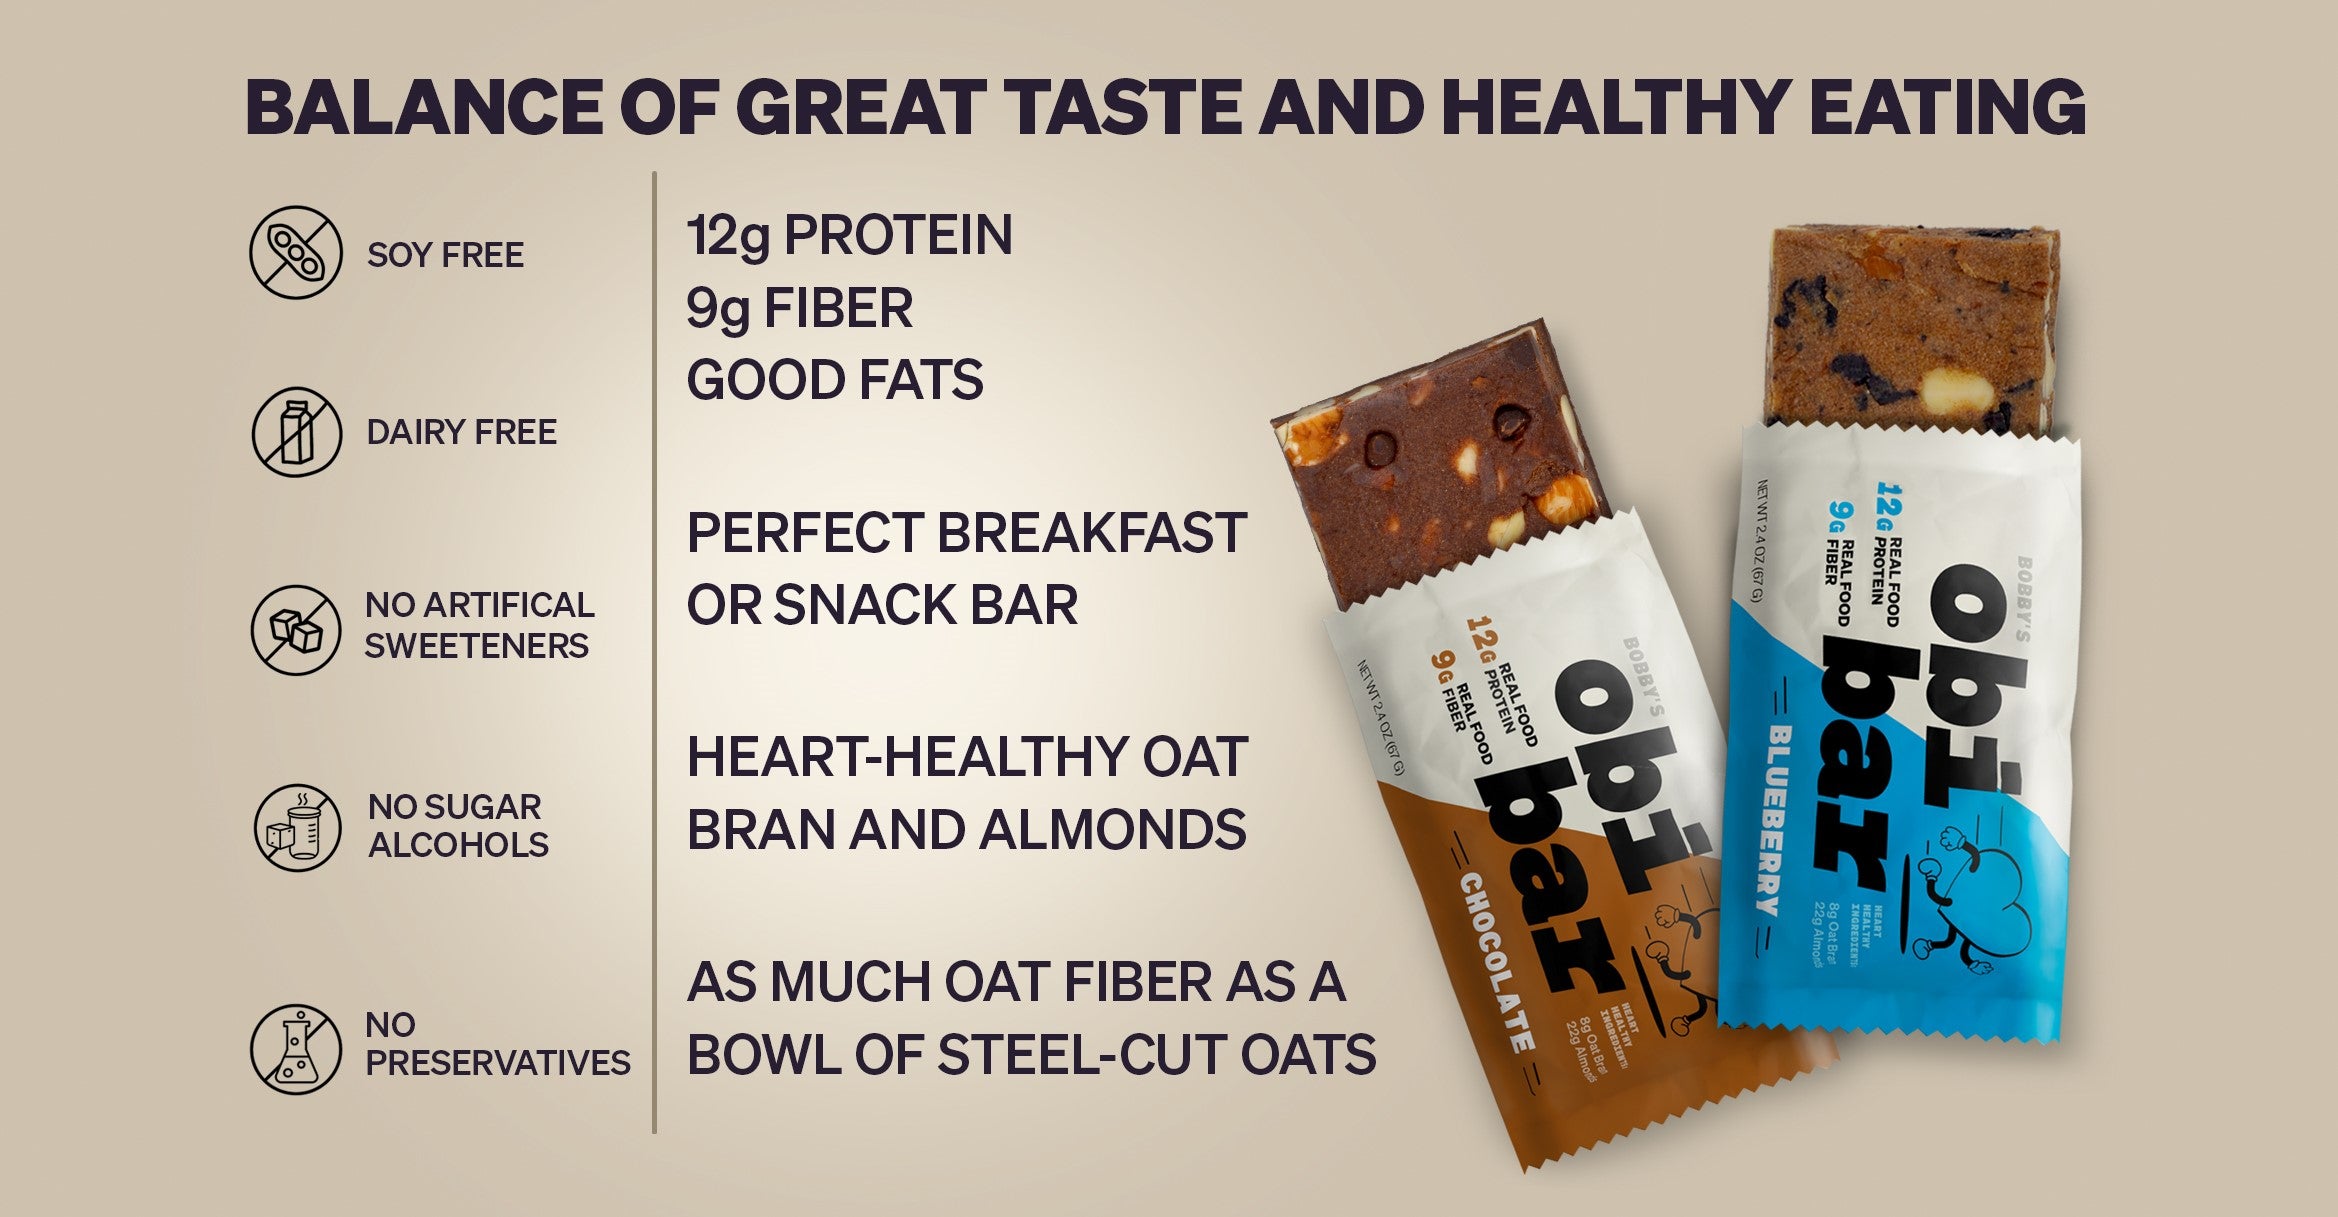 meal replacement bar oat high fiber filling protein natural heart healthy no dairy soy